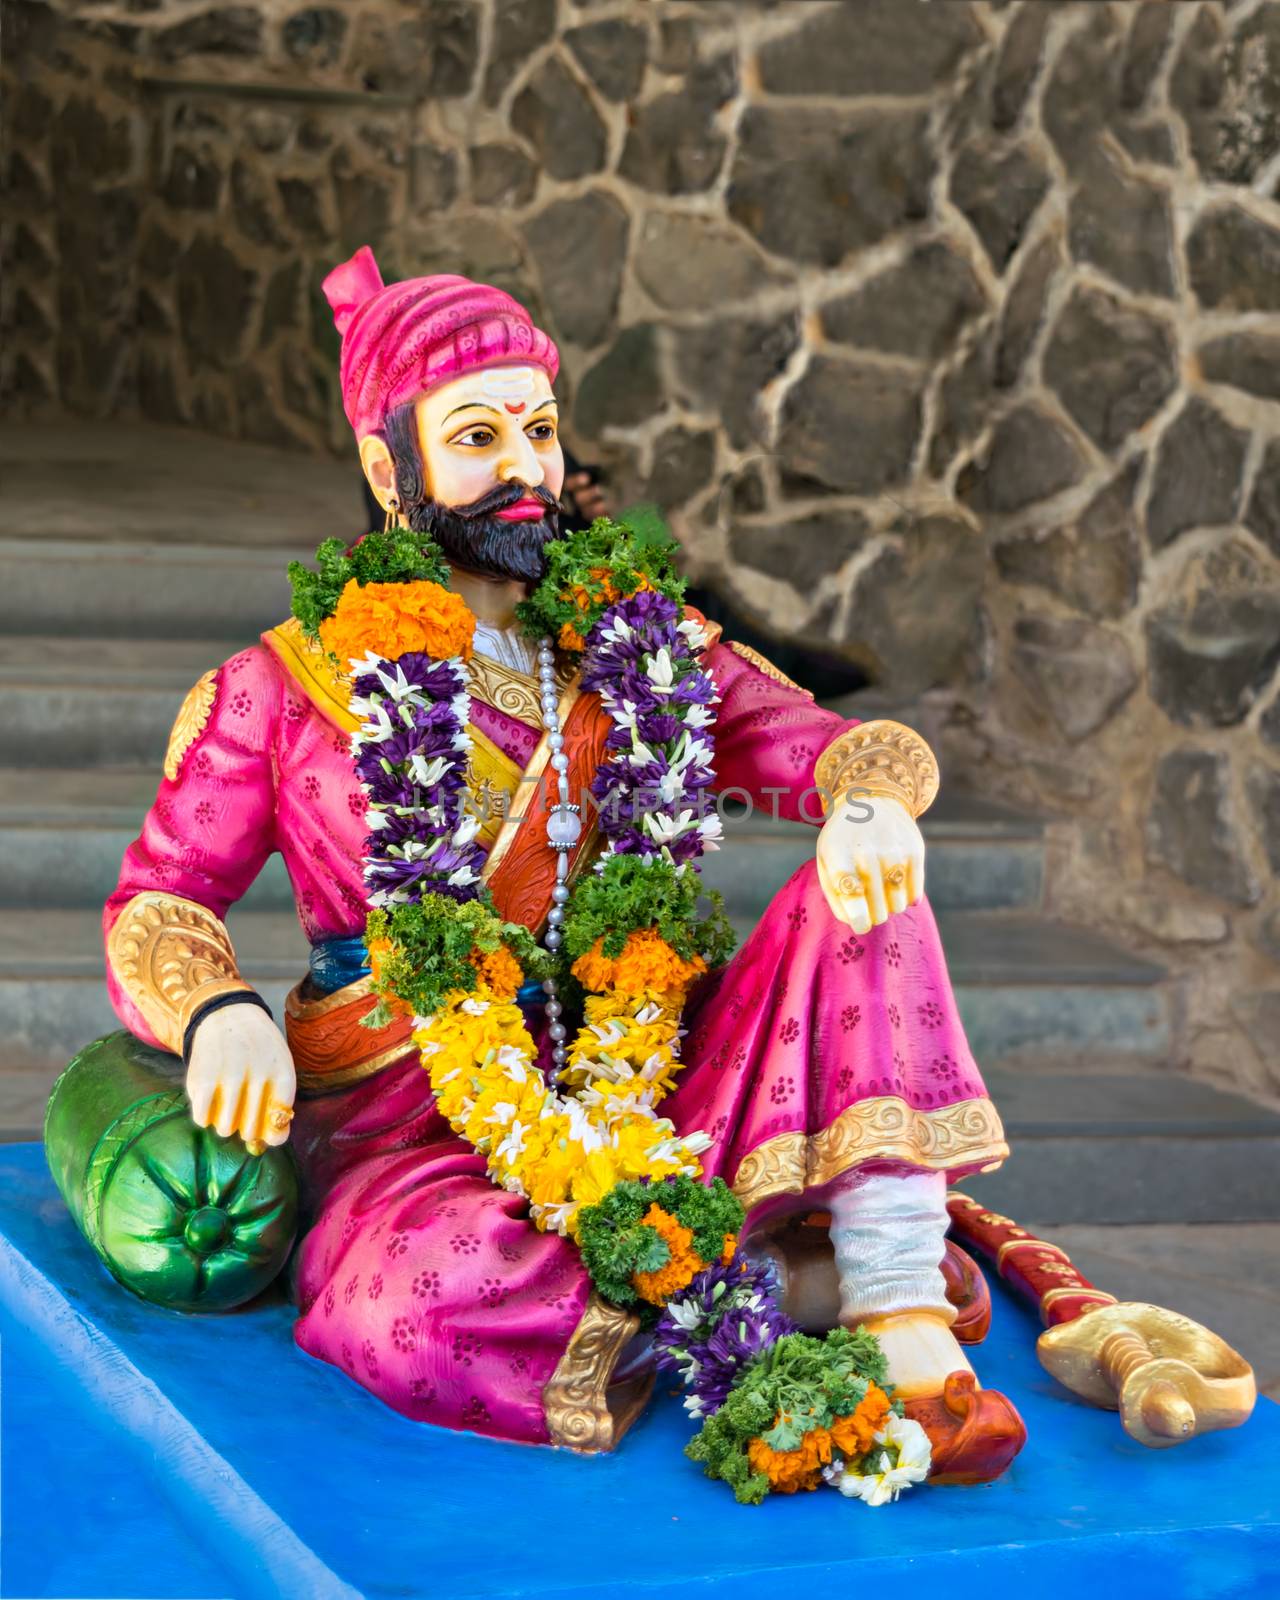 Pink colored Garlanded idol of Chatrapati Shivaji Maharaj placed on a table.